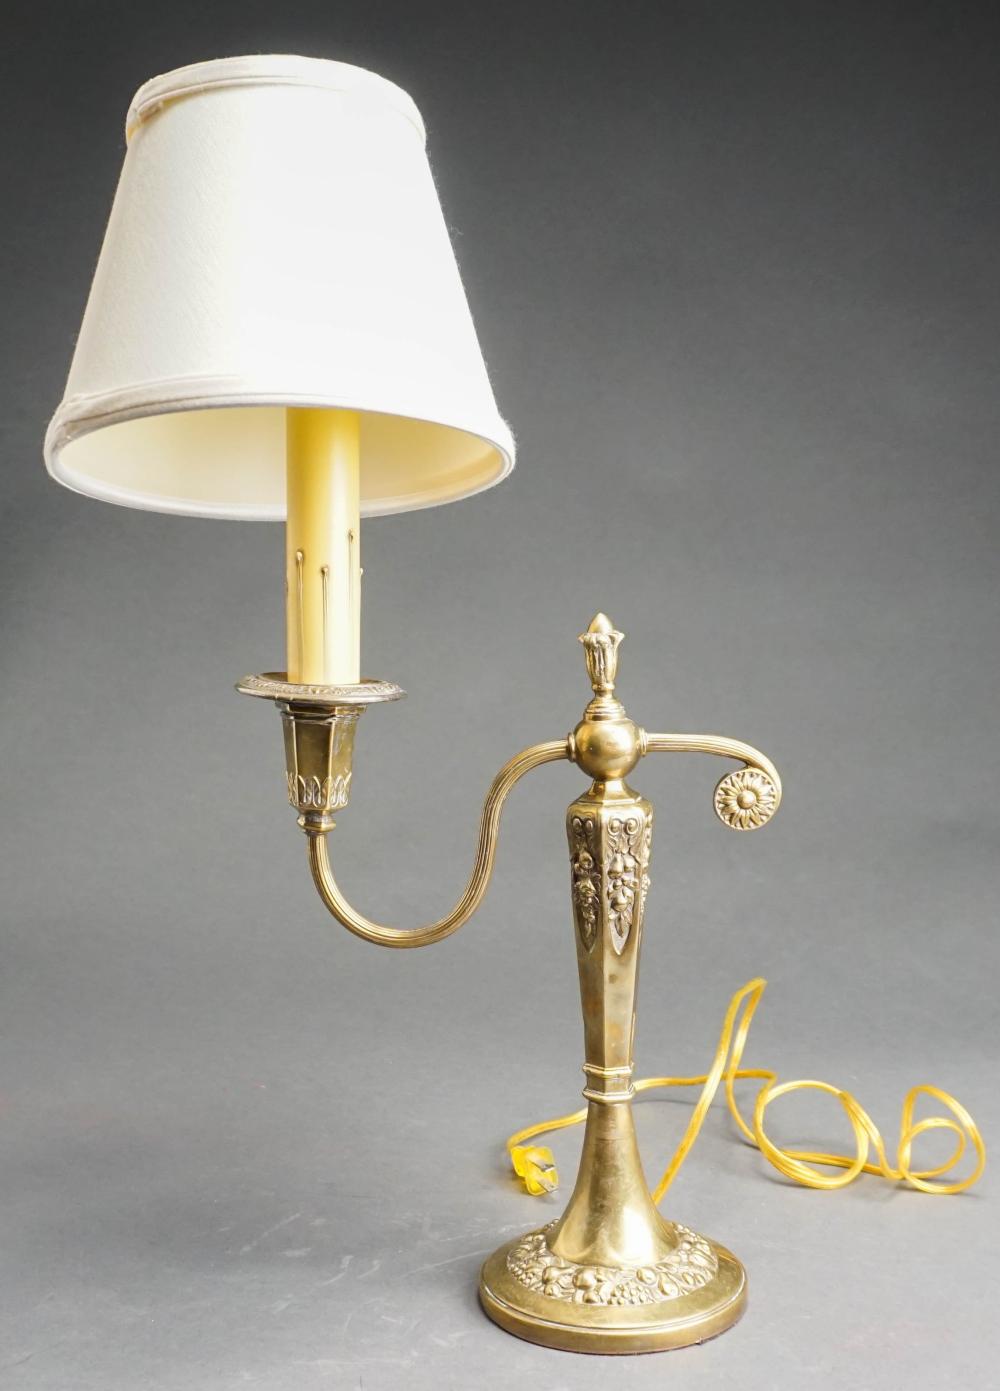 NEOCLASSICAL STYLE BRASS SINGLE